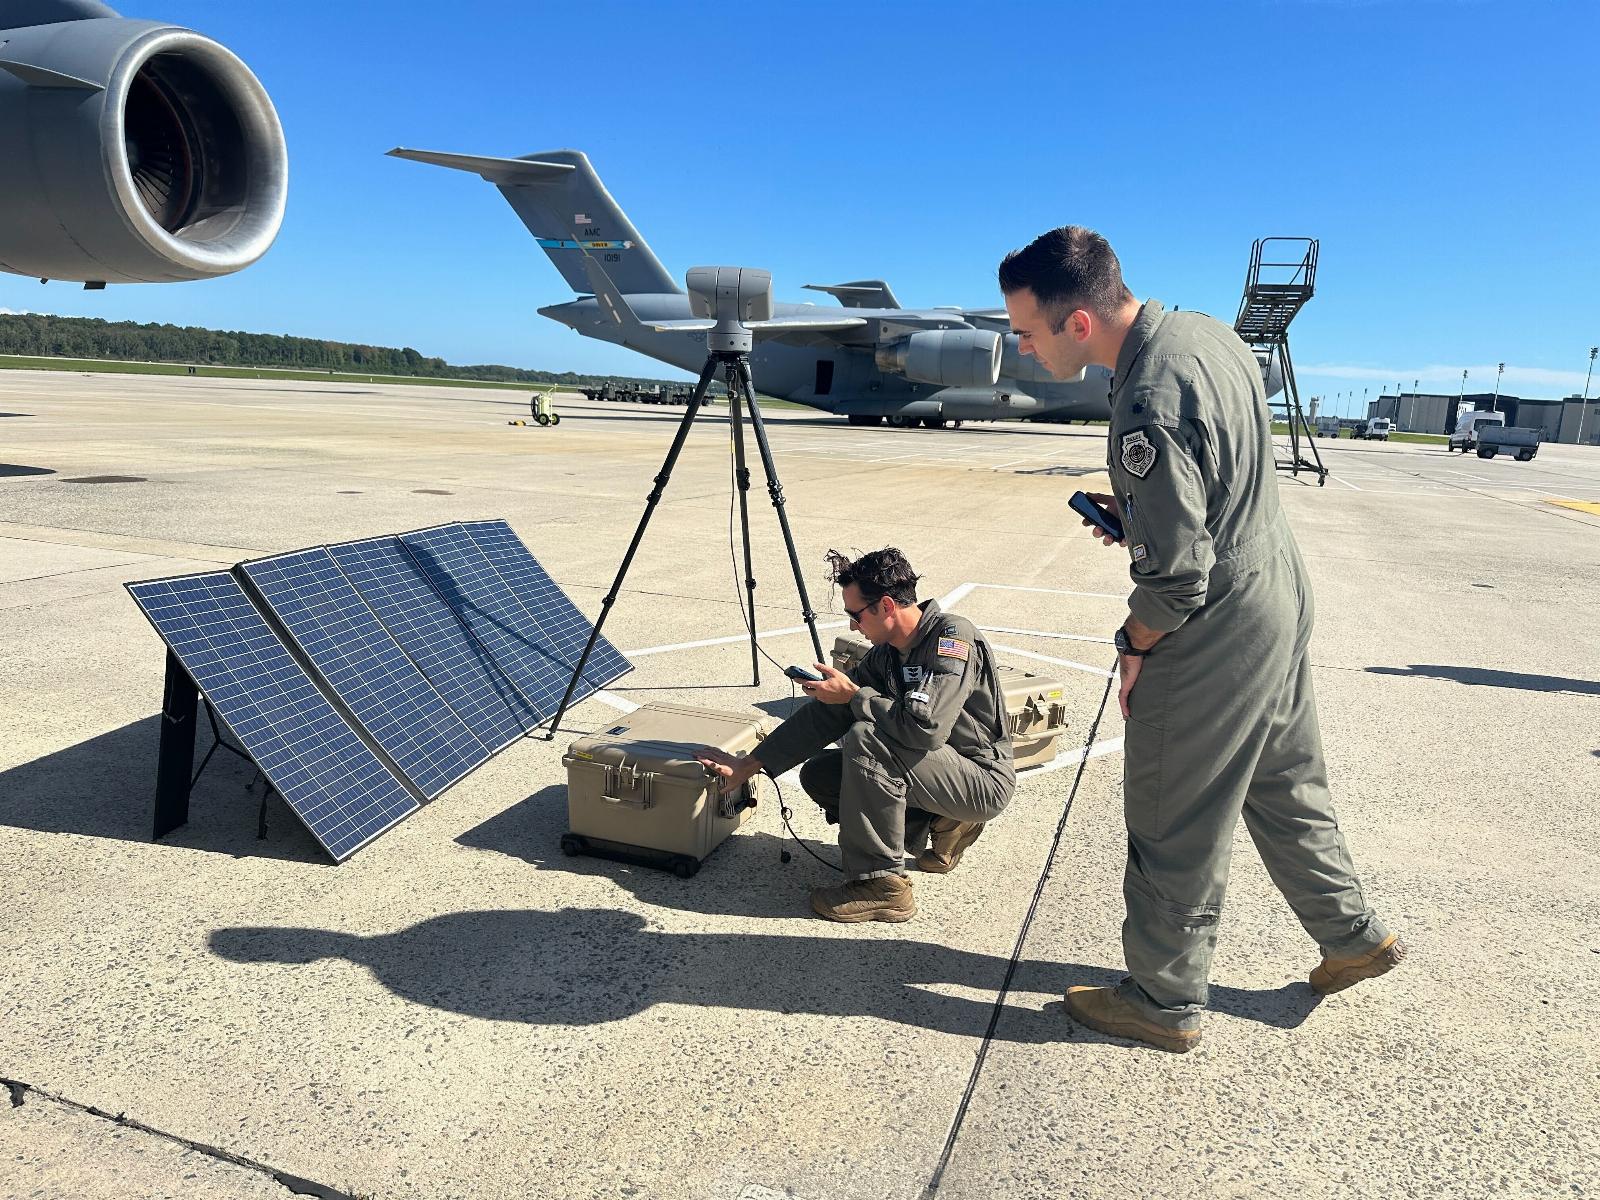 Picogrid scores new funding to connect the military’s stovepipe systems